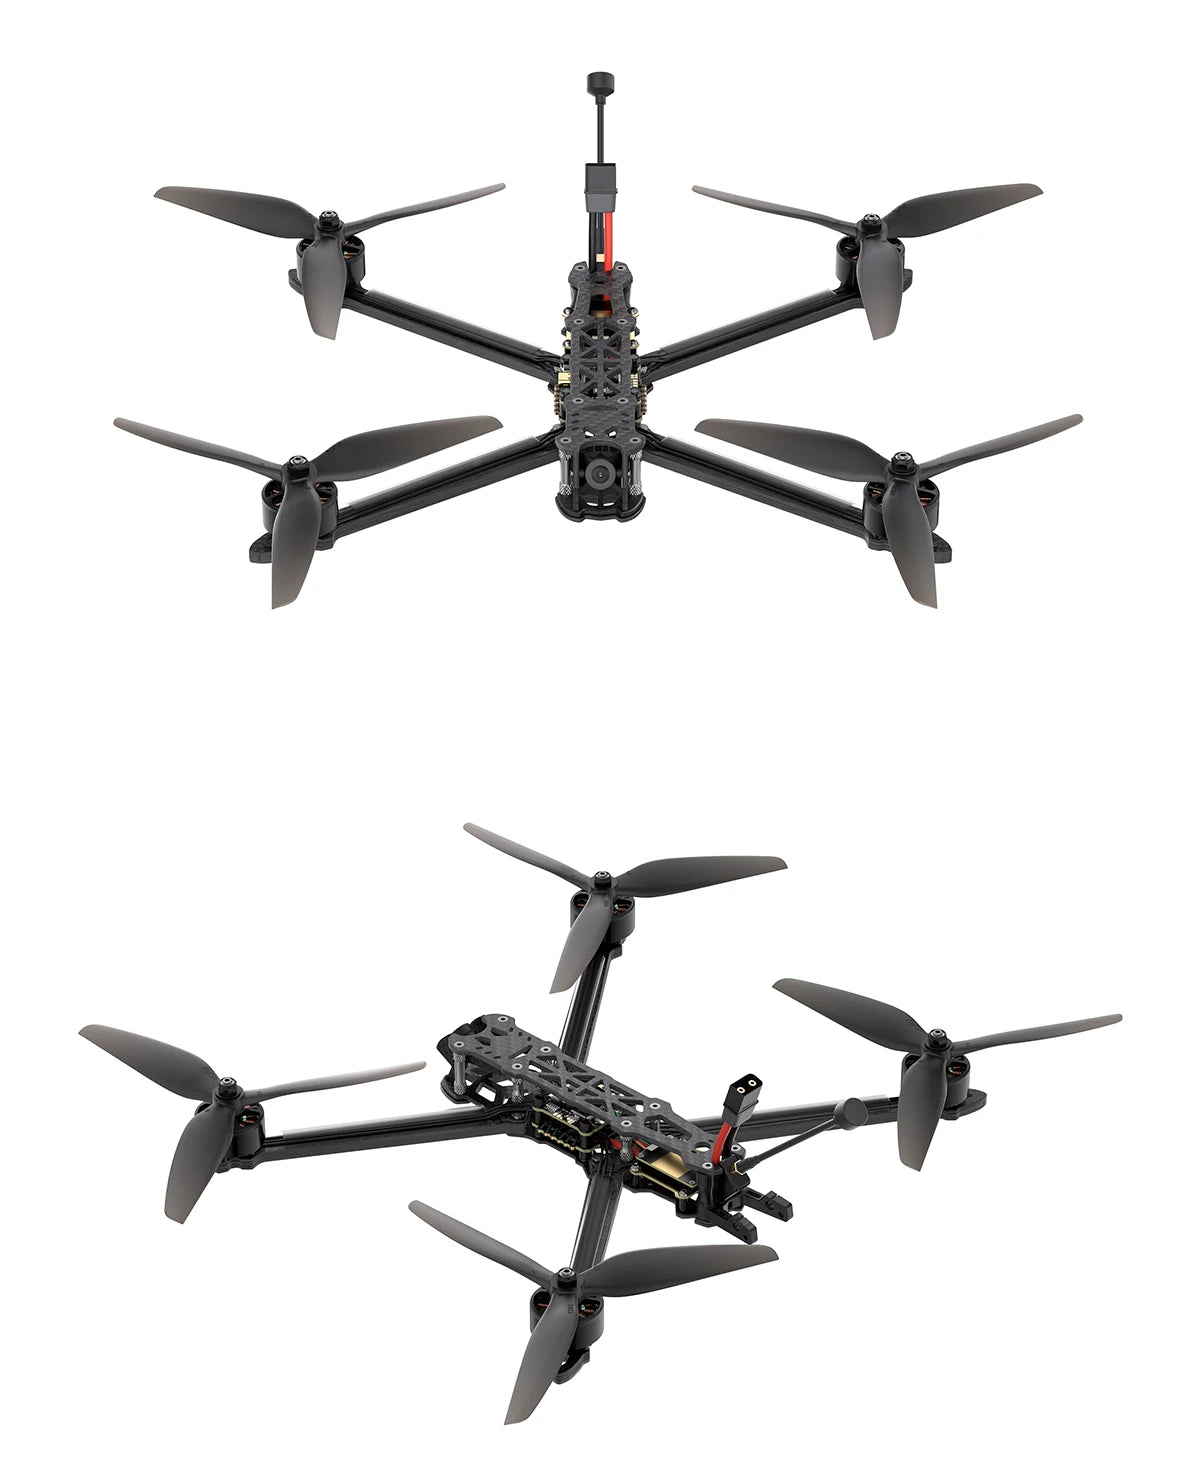 GEPRC MARK4 LR8 5.8G 1.6W FPV, if the payment amount is greater than 150 euros, AiExpress will not charge any